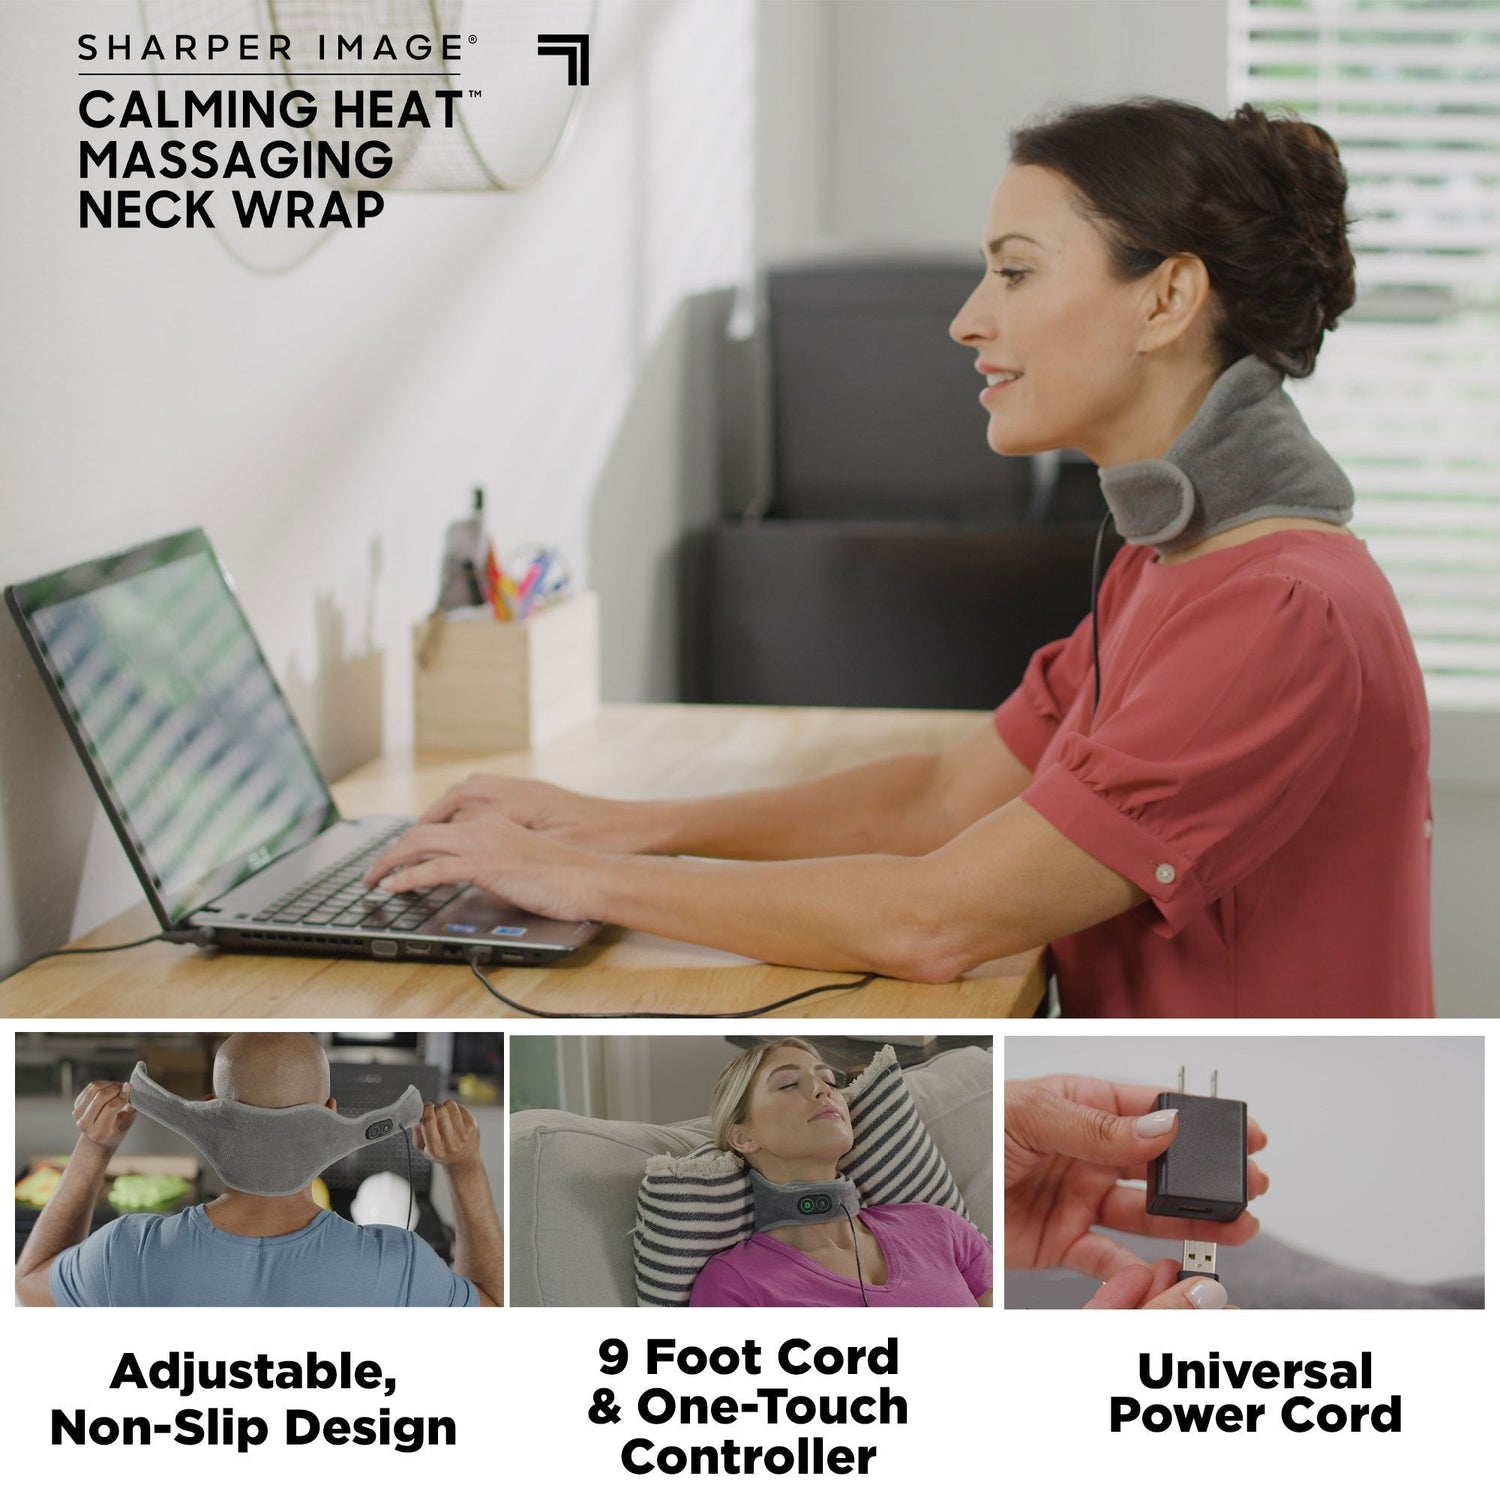 Neck Wrap Basic - The Personal Electric Neck Heating Pad with Vibratio